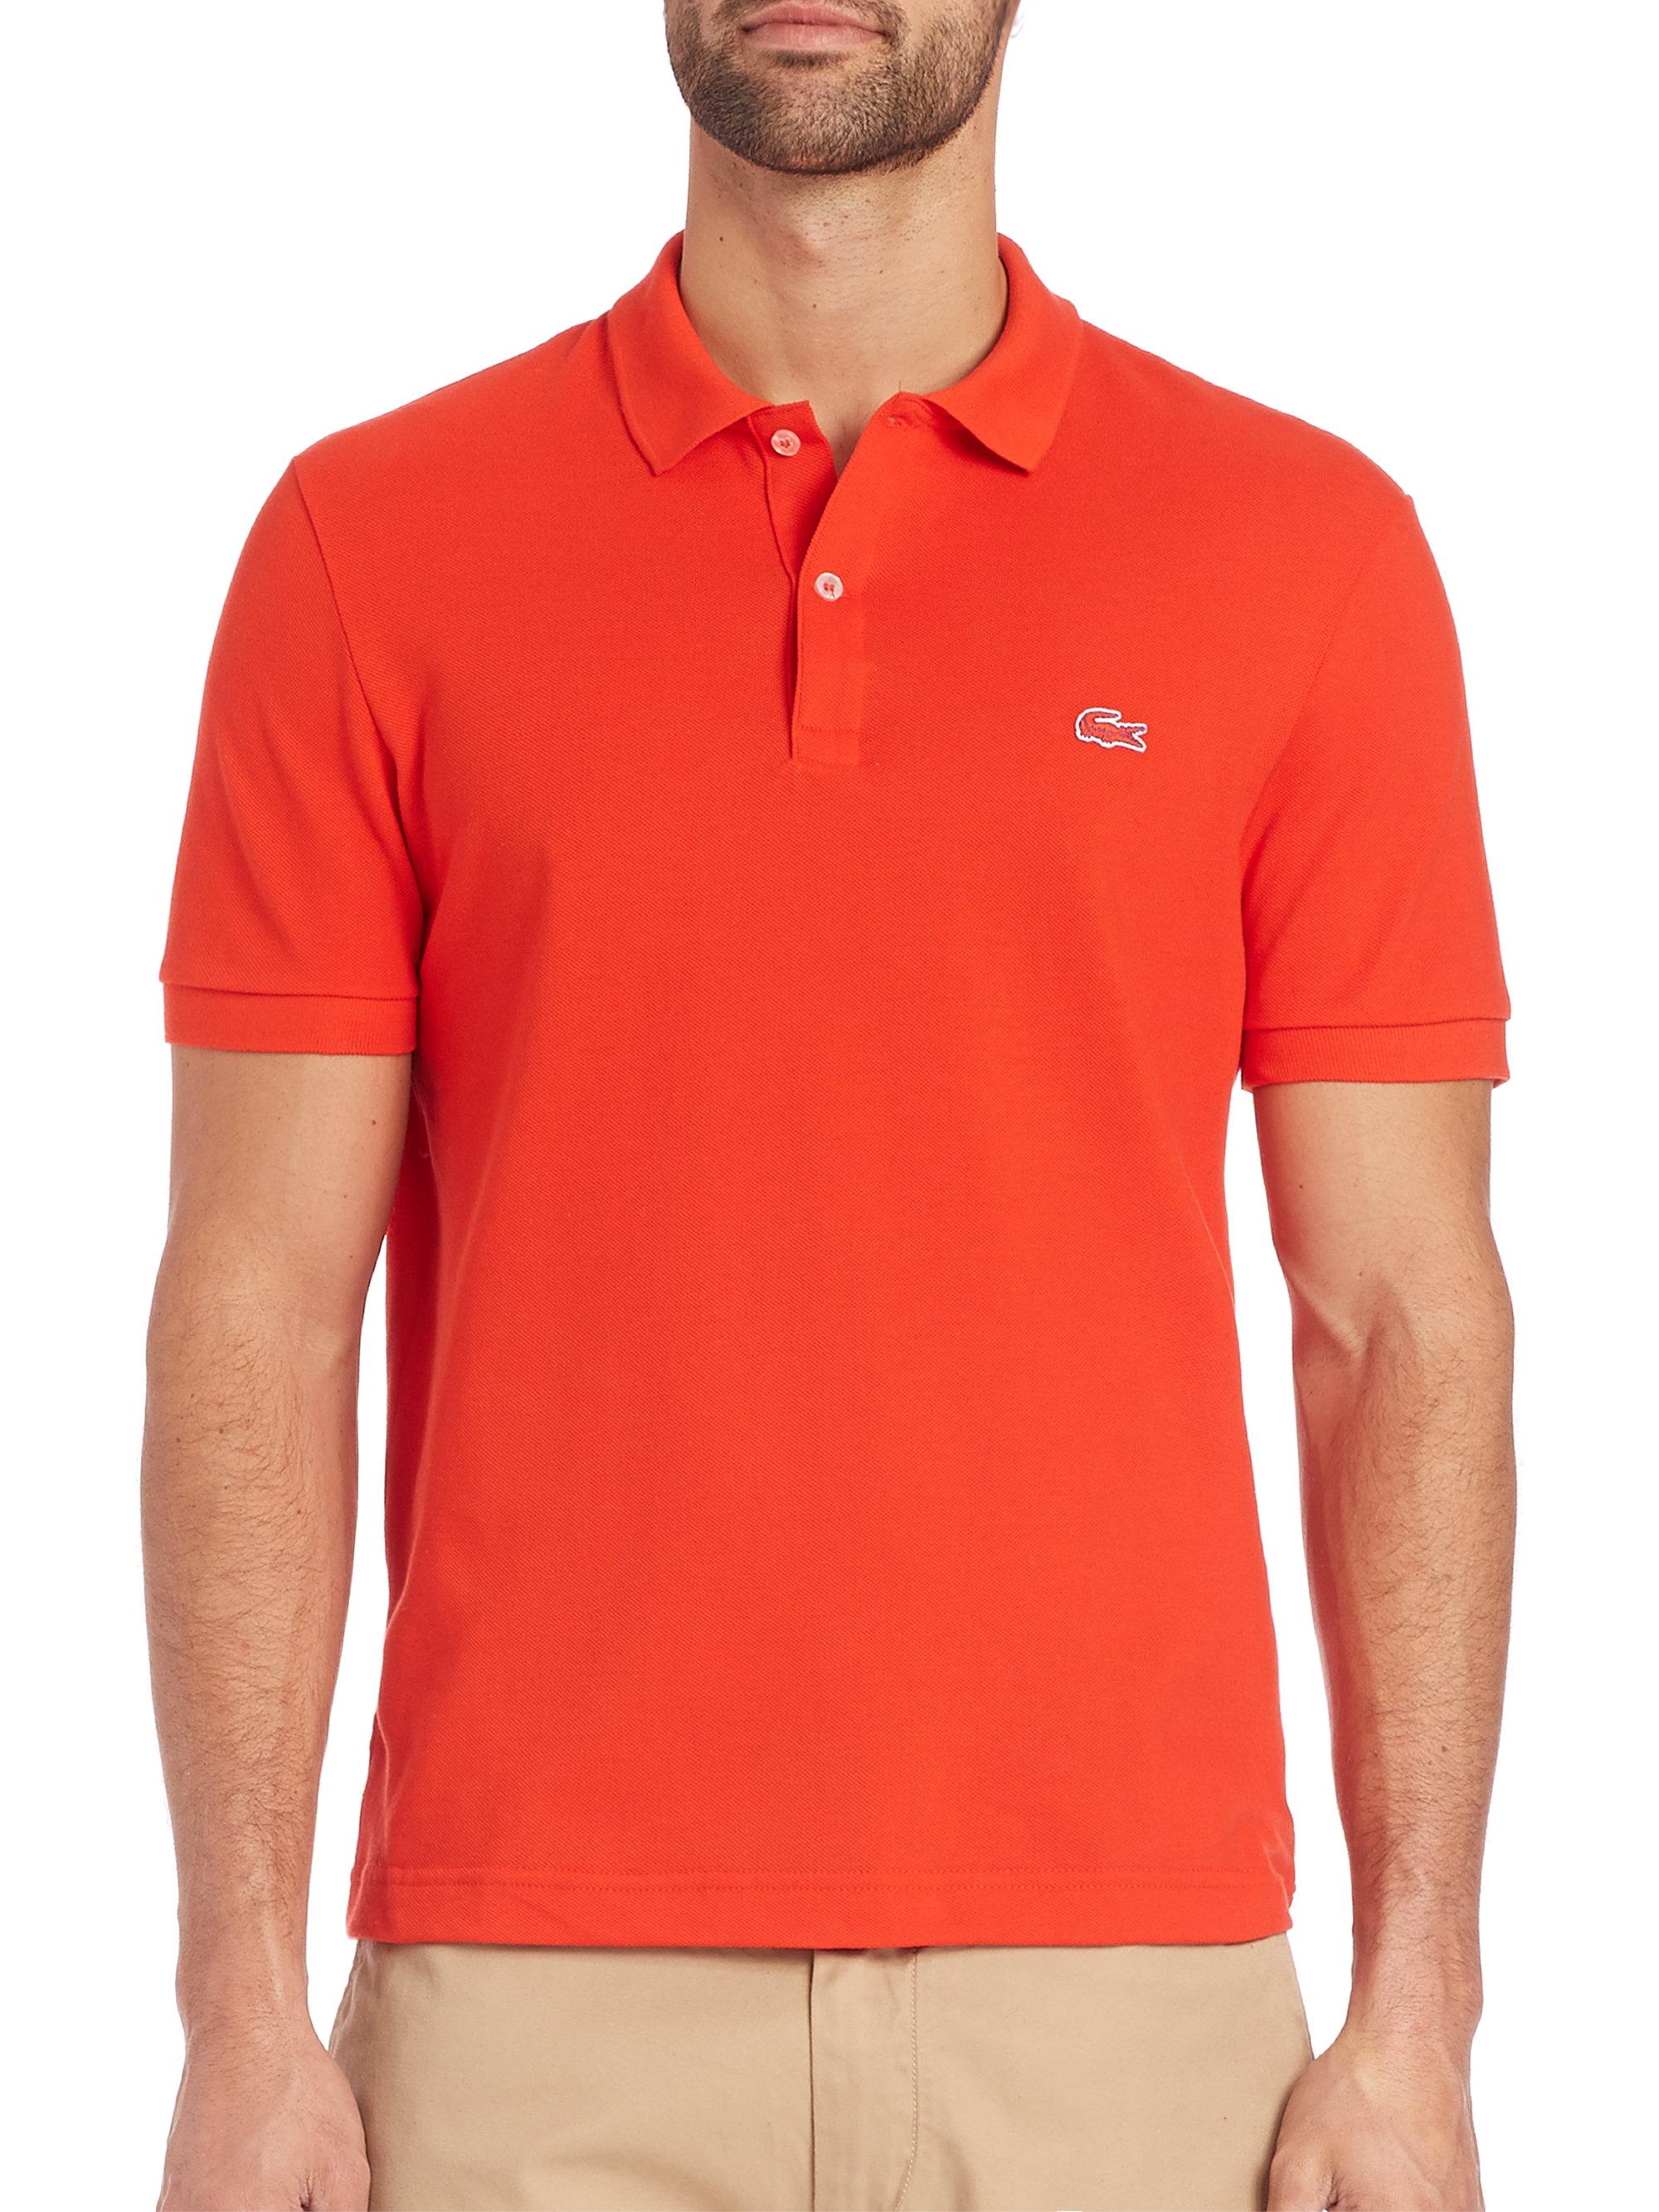 Lacoste Cotton Tonal Croc Polo in Red for Men - Lyst